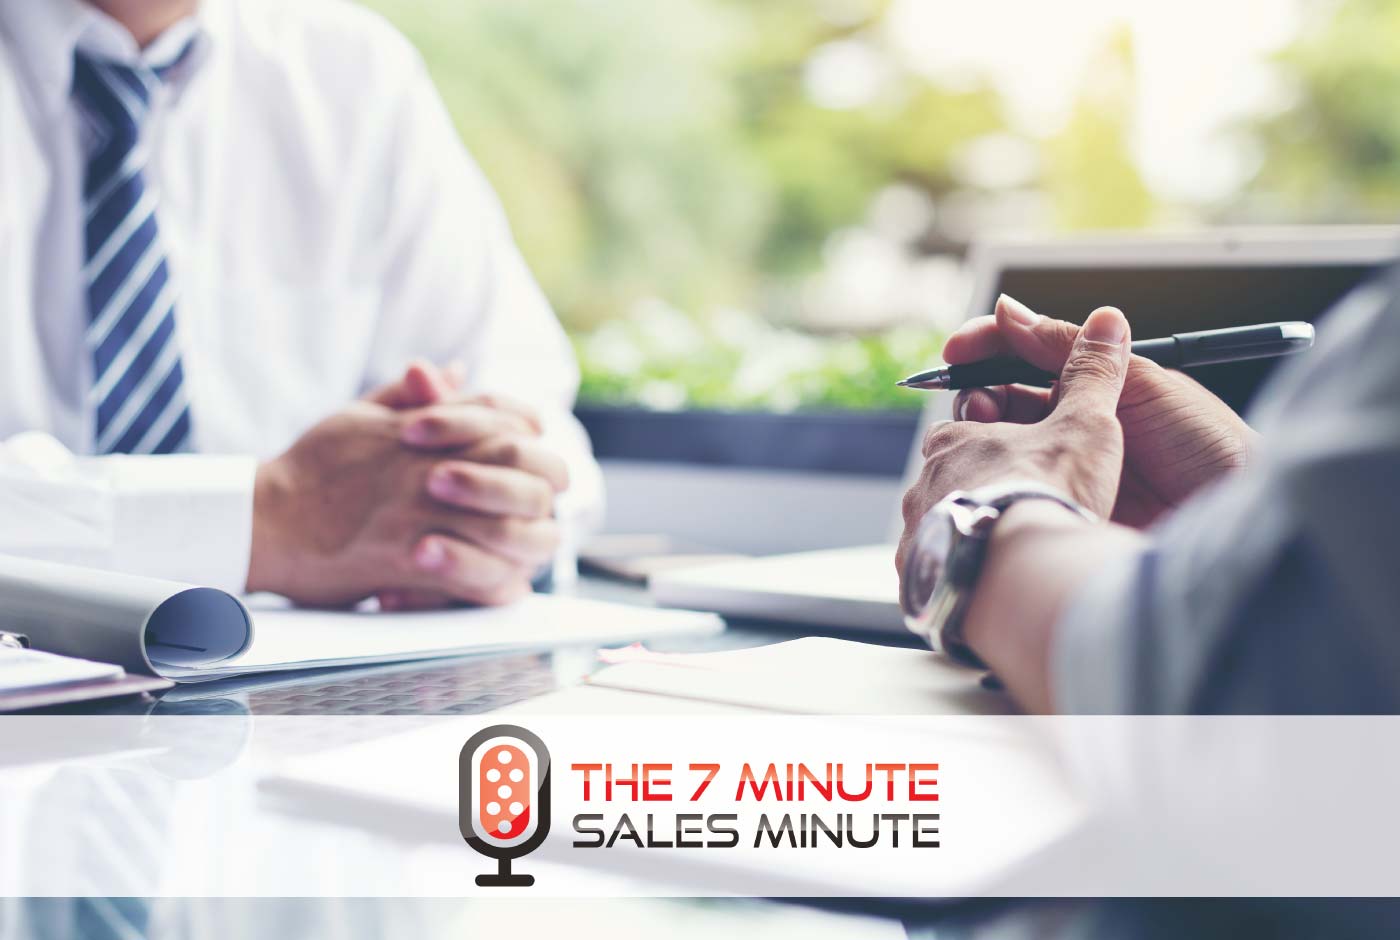 7 Minute Sales Minute Podcast - Season 13 - Episode 5 - Know Your Role... Play - Two Businessmen sitting across desk from each other